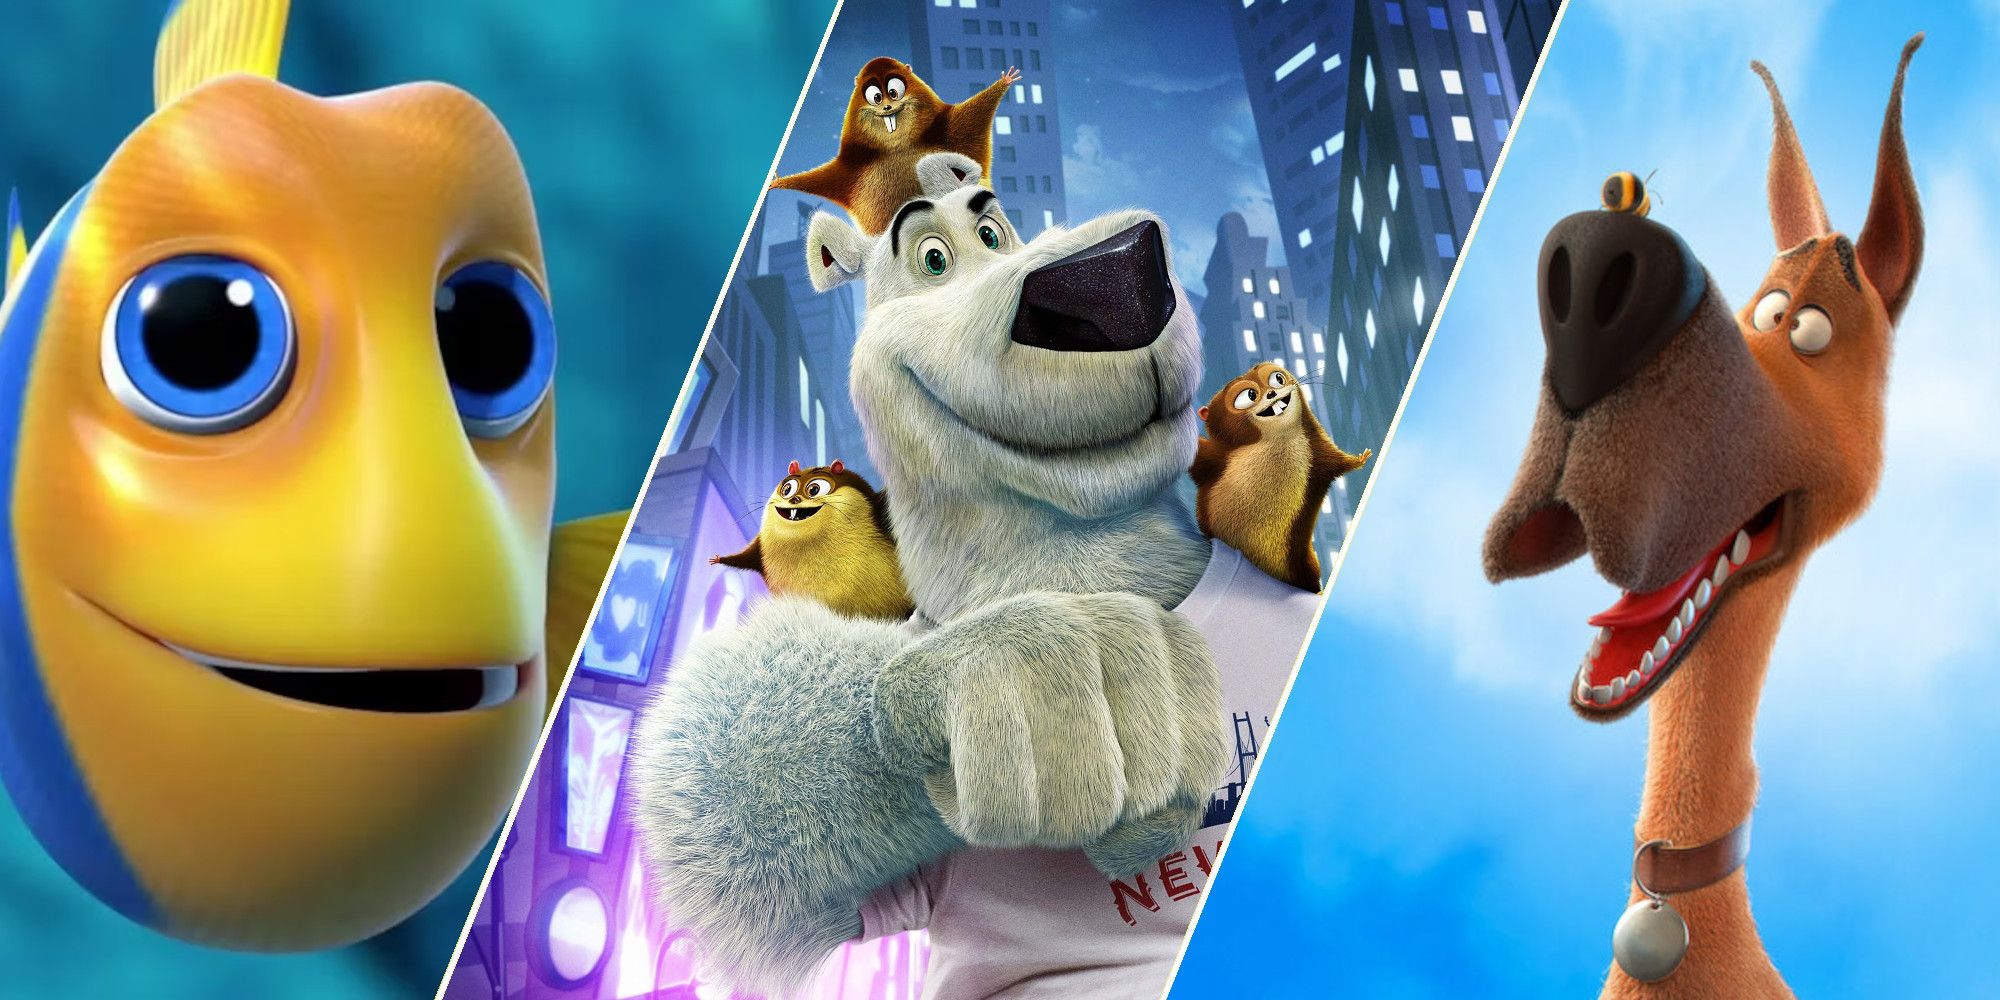 10 Worst Animated Movies of All Time, Ranked According to Letterboxd